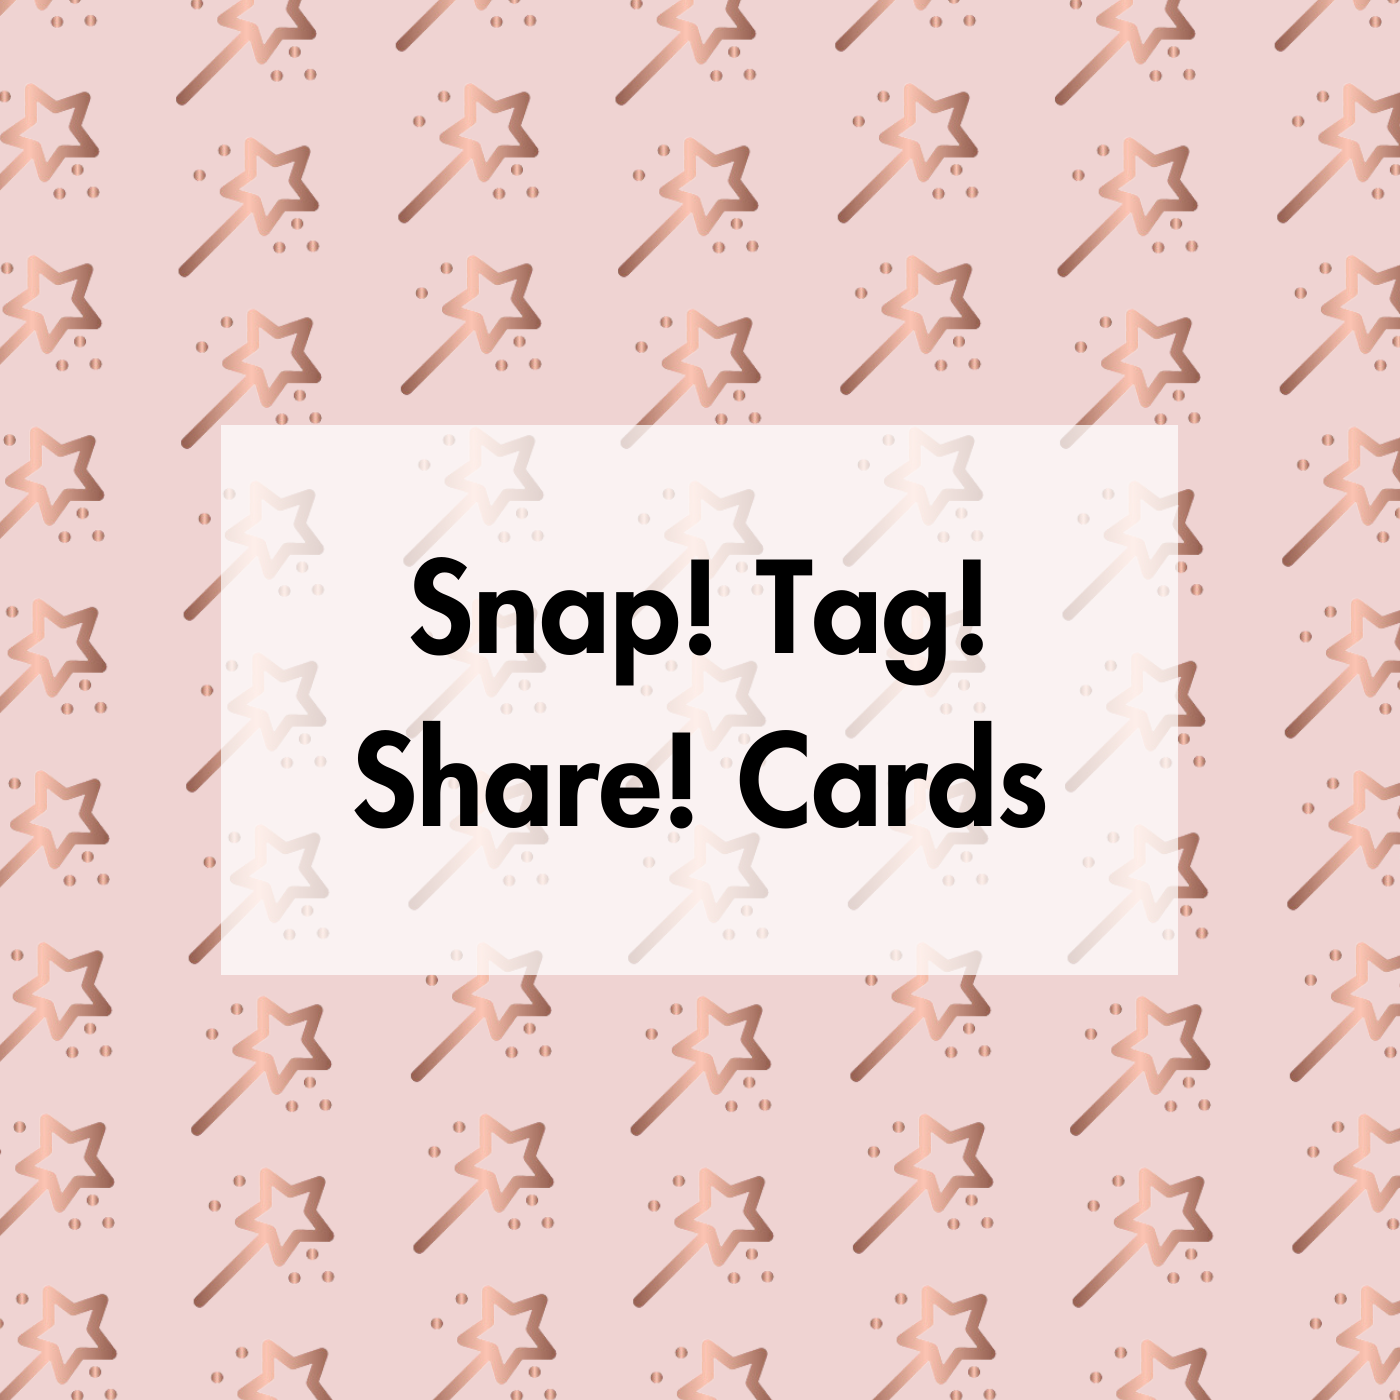 SNAP! TAG! SHARE! CARDS